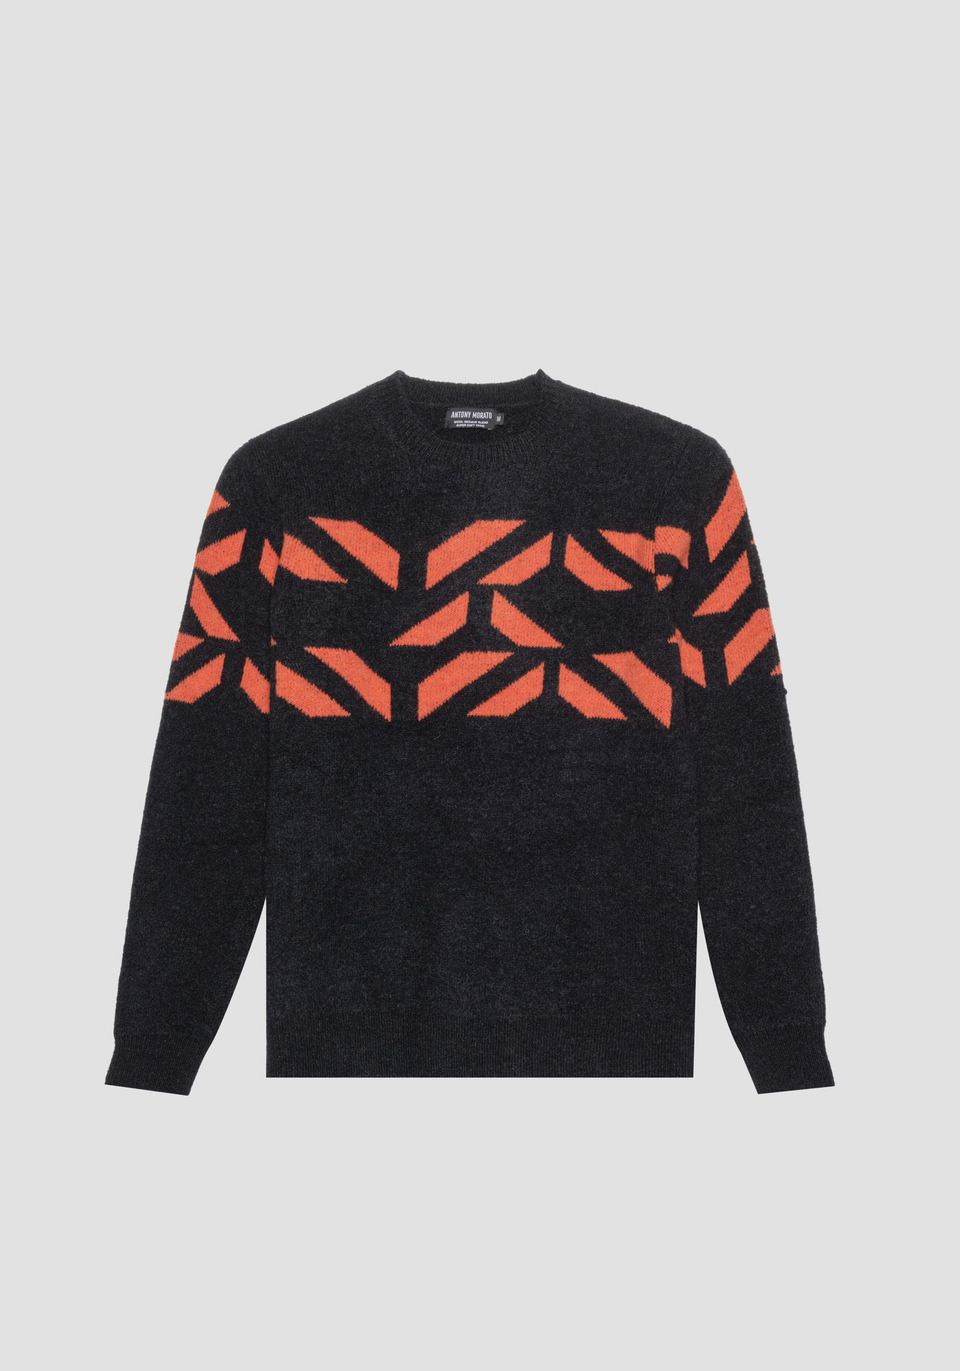 REGULAR FIT SWEATER IN MOHAIR BLEND YARN WITH JACQUARD PATTERN - Antony Morato Online Shop